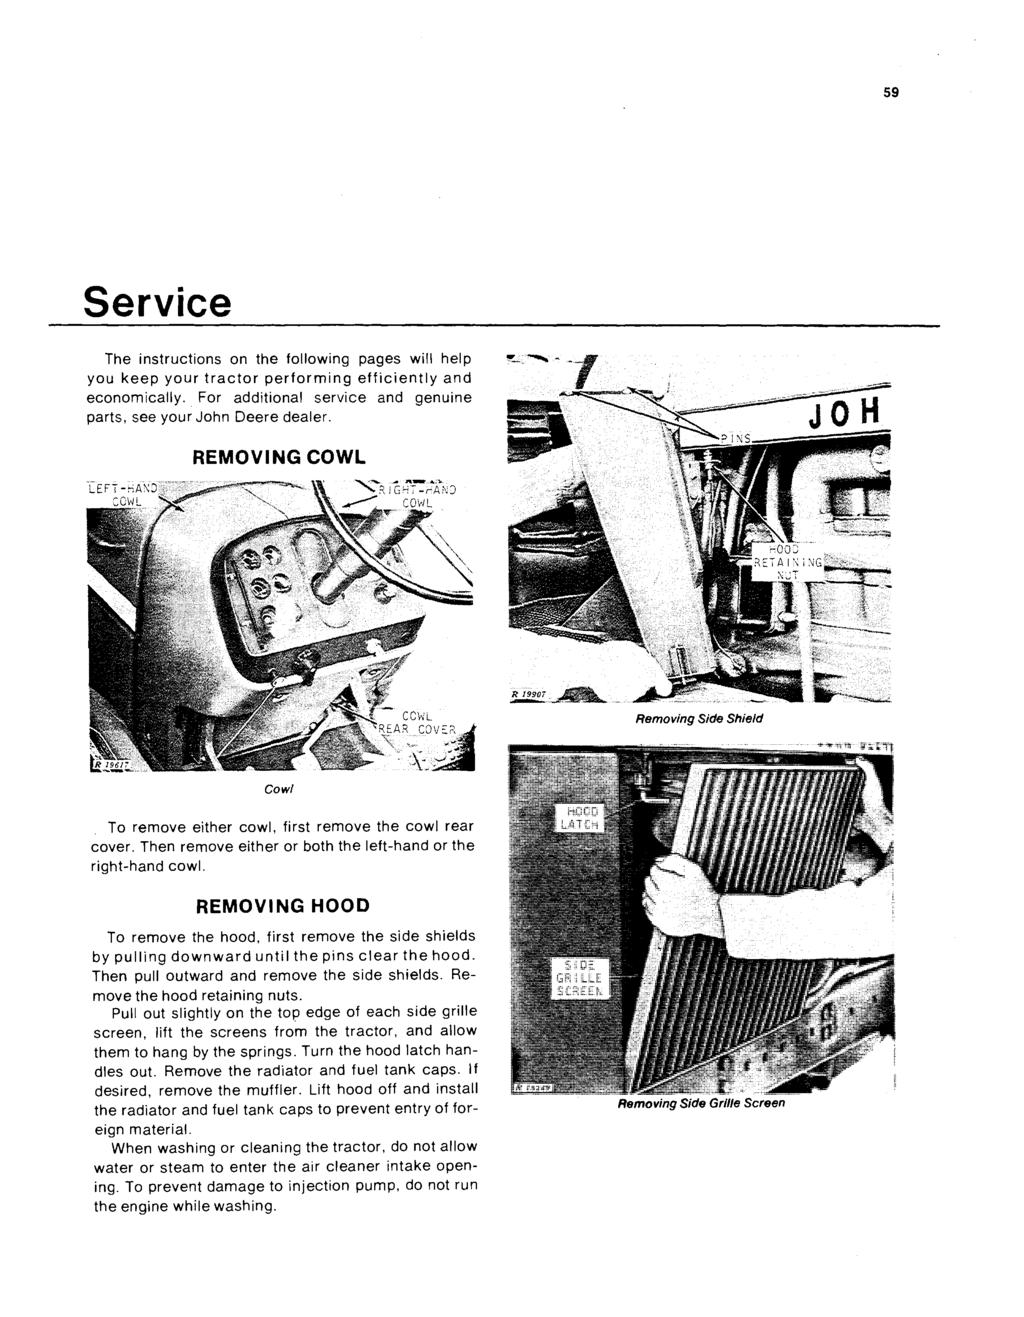 59 Service The instructions on the following pages will help you keep your tractor performing efficiently and economically. For additional service and genuine parts, see your John Deere dealer.